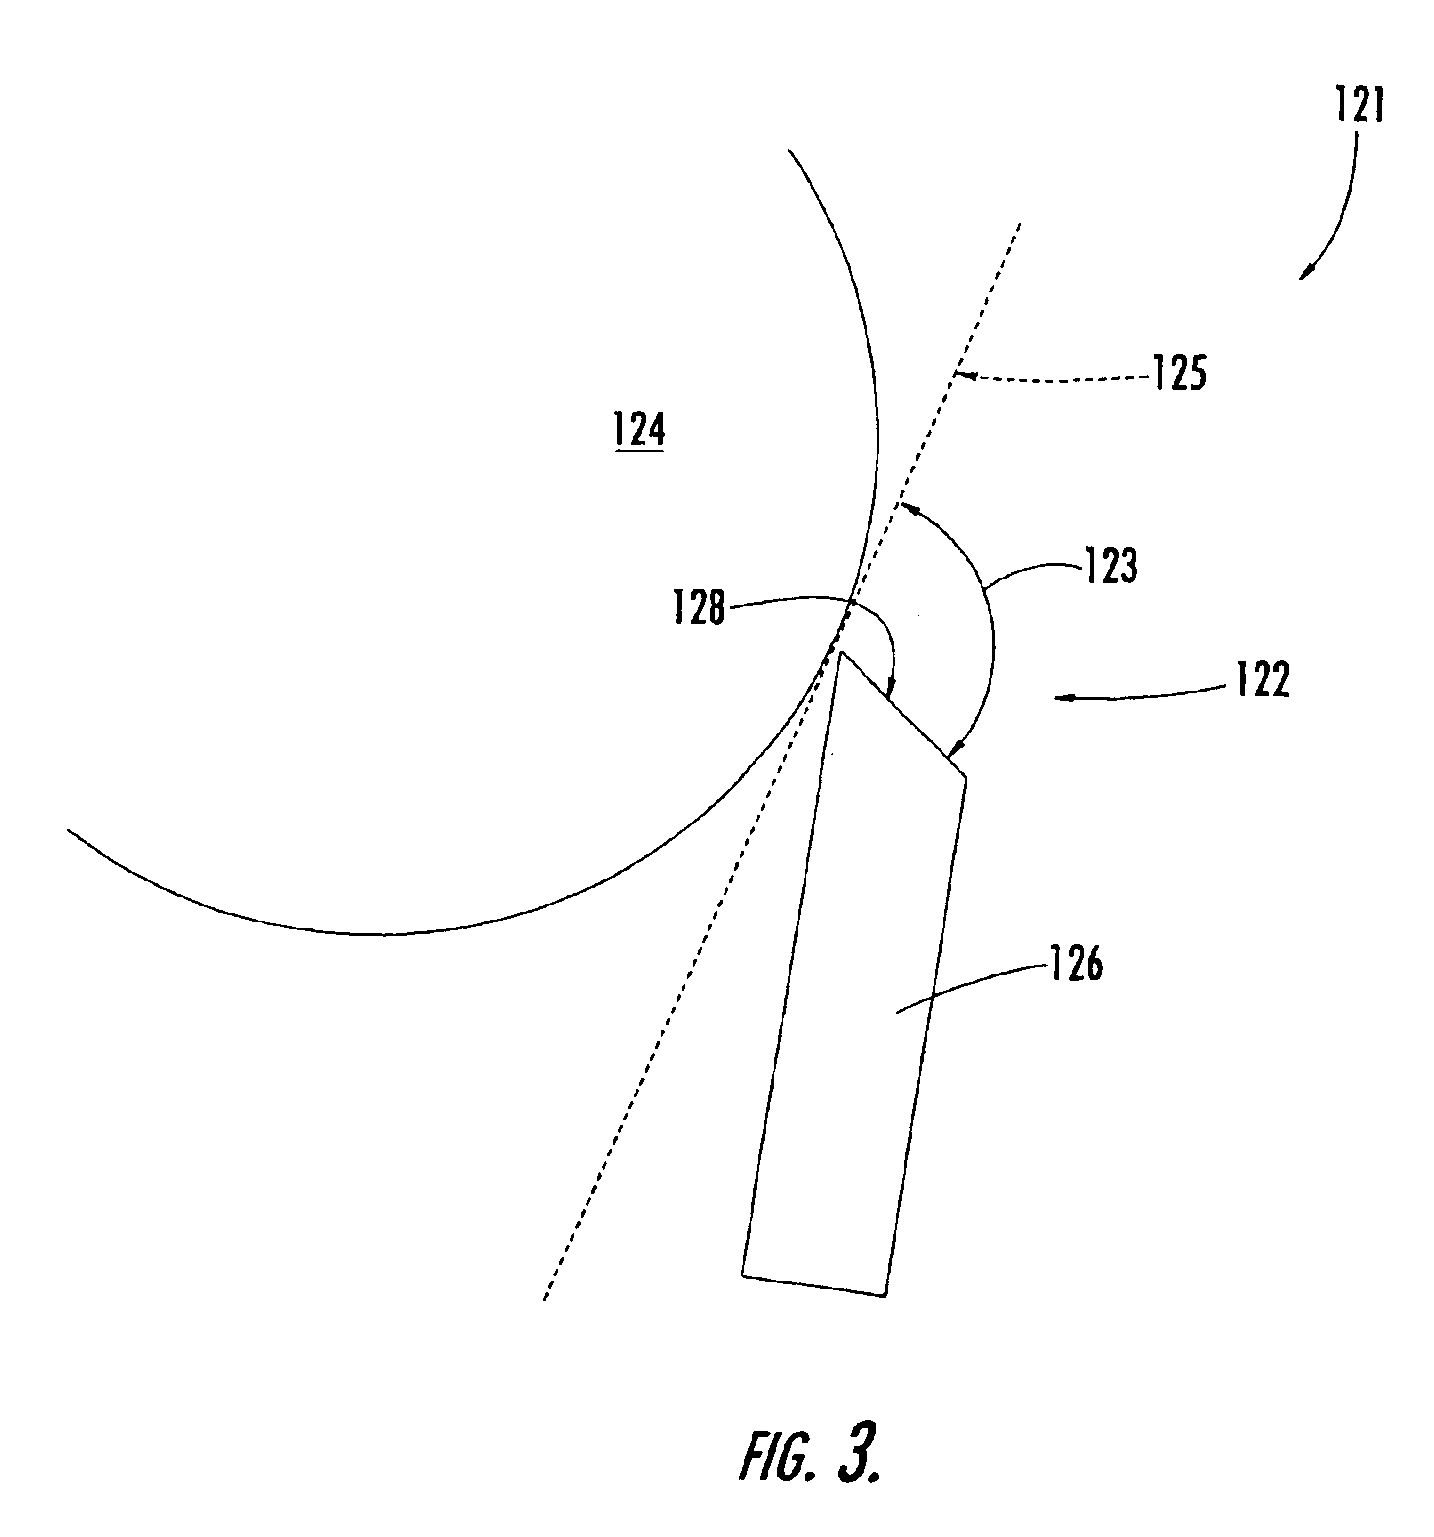 Method and system for manufacturing tissue products, and products produced thereby